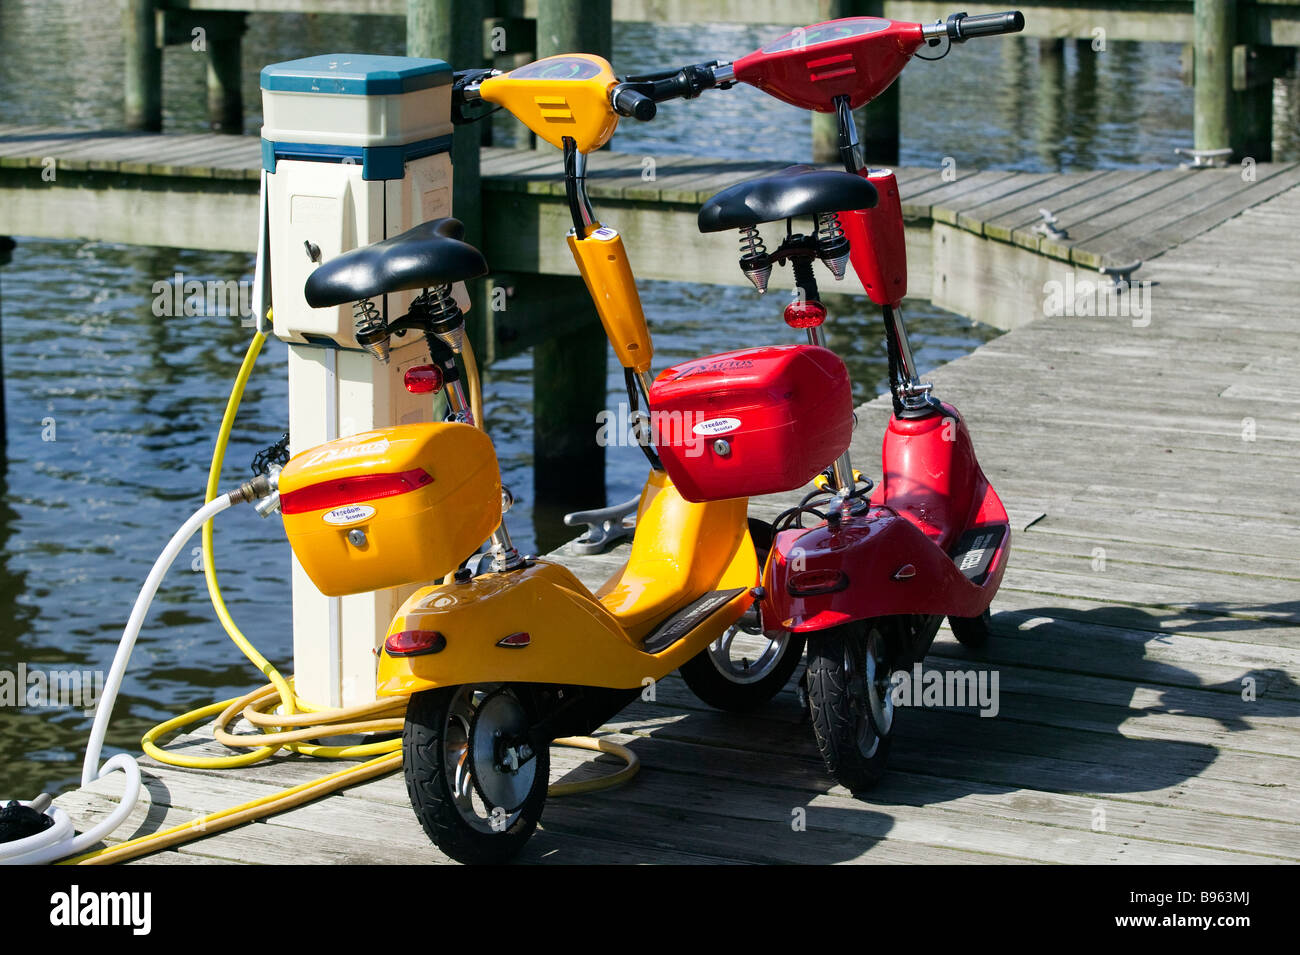 Two alternative energy vehicles, electric scooters on a dock at lakeside. Stock Photo